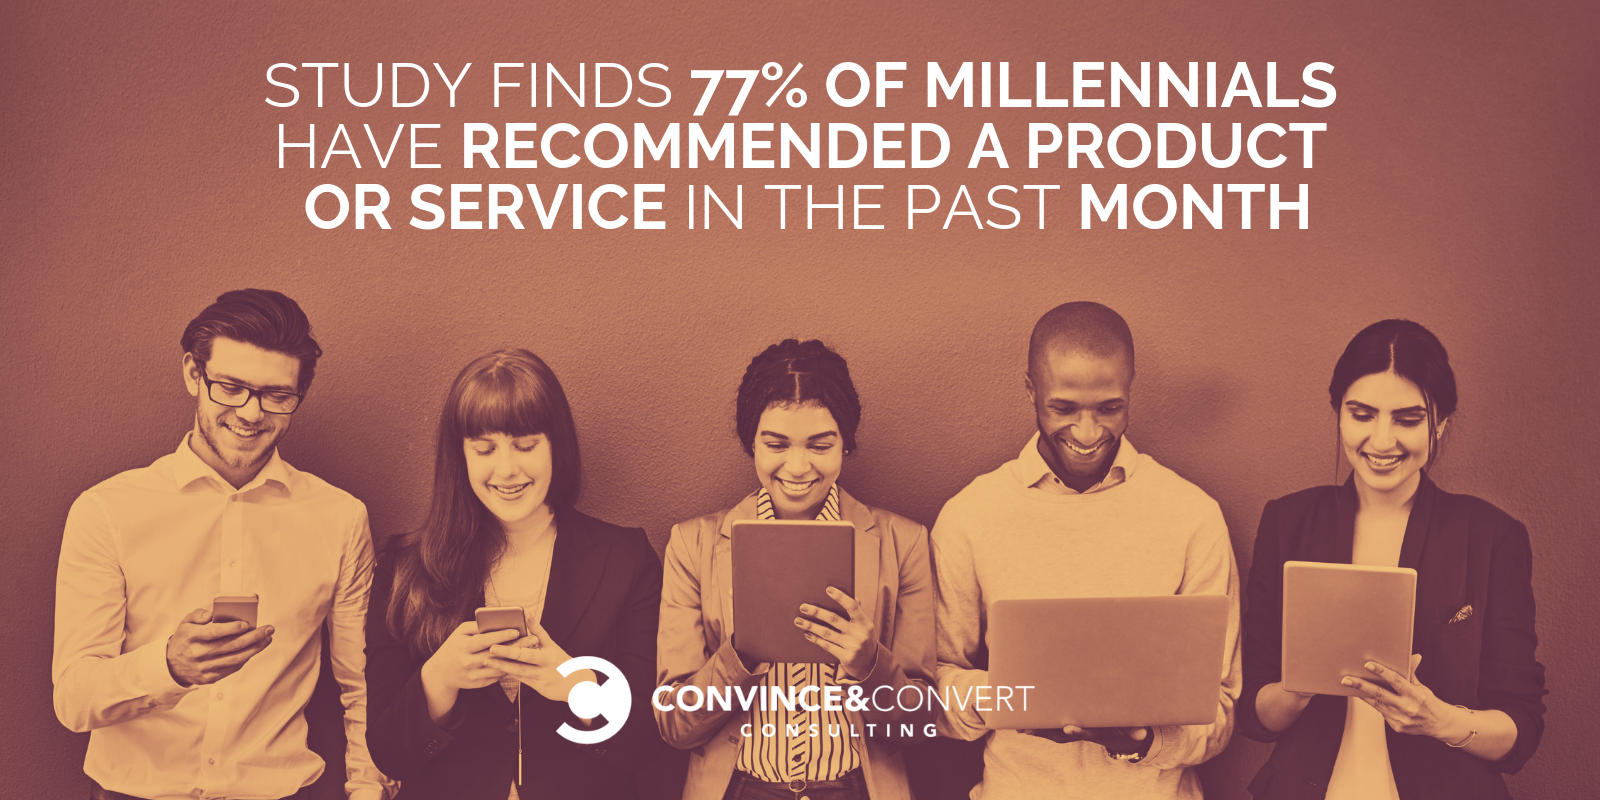 millennials-recommend-product-service.png